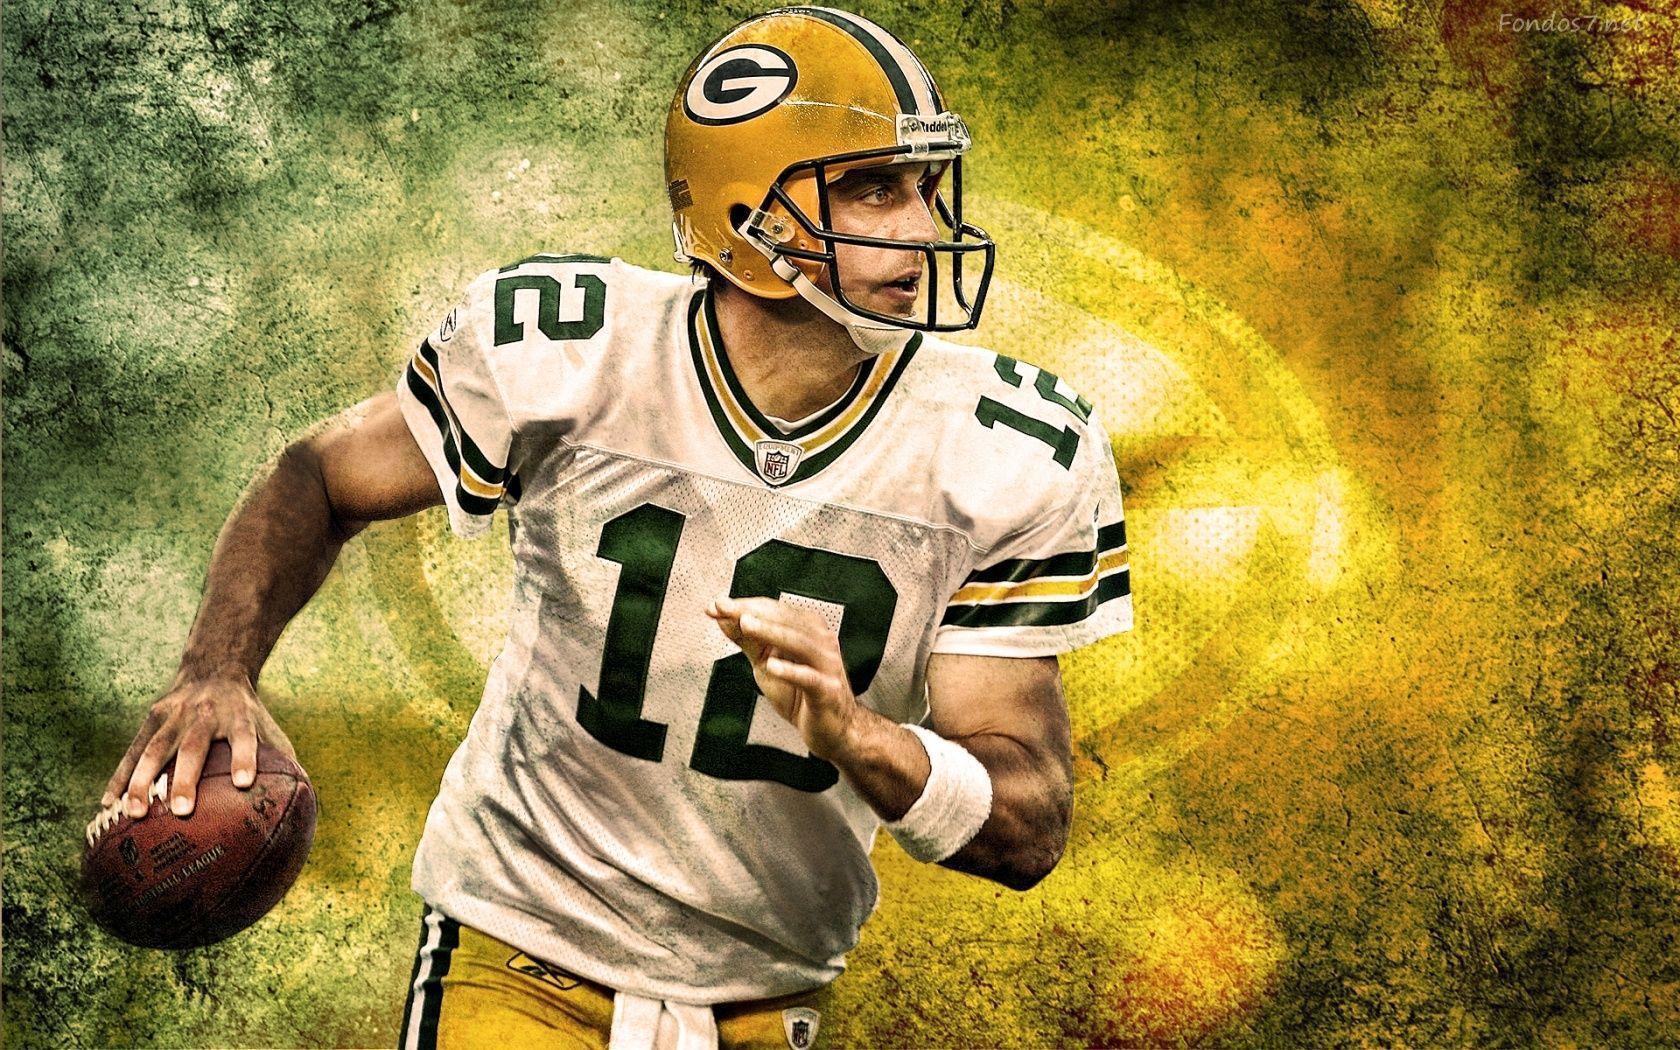 Aaron Rodgers Wallpaper, PC Aaron Rodgers Excellent Image (Fungyung)